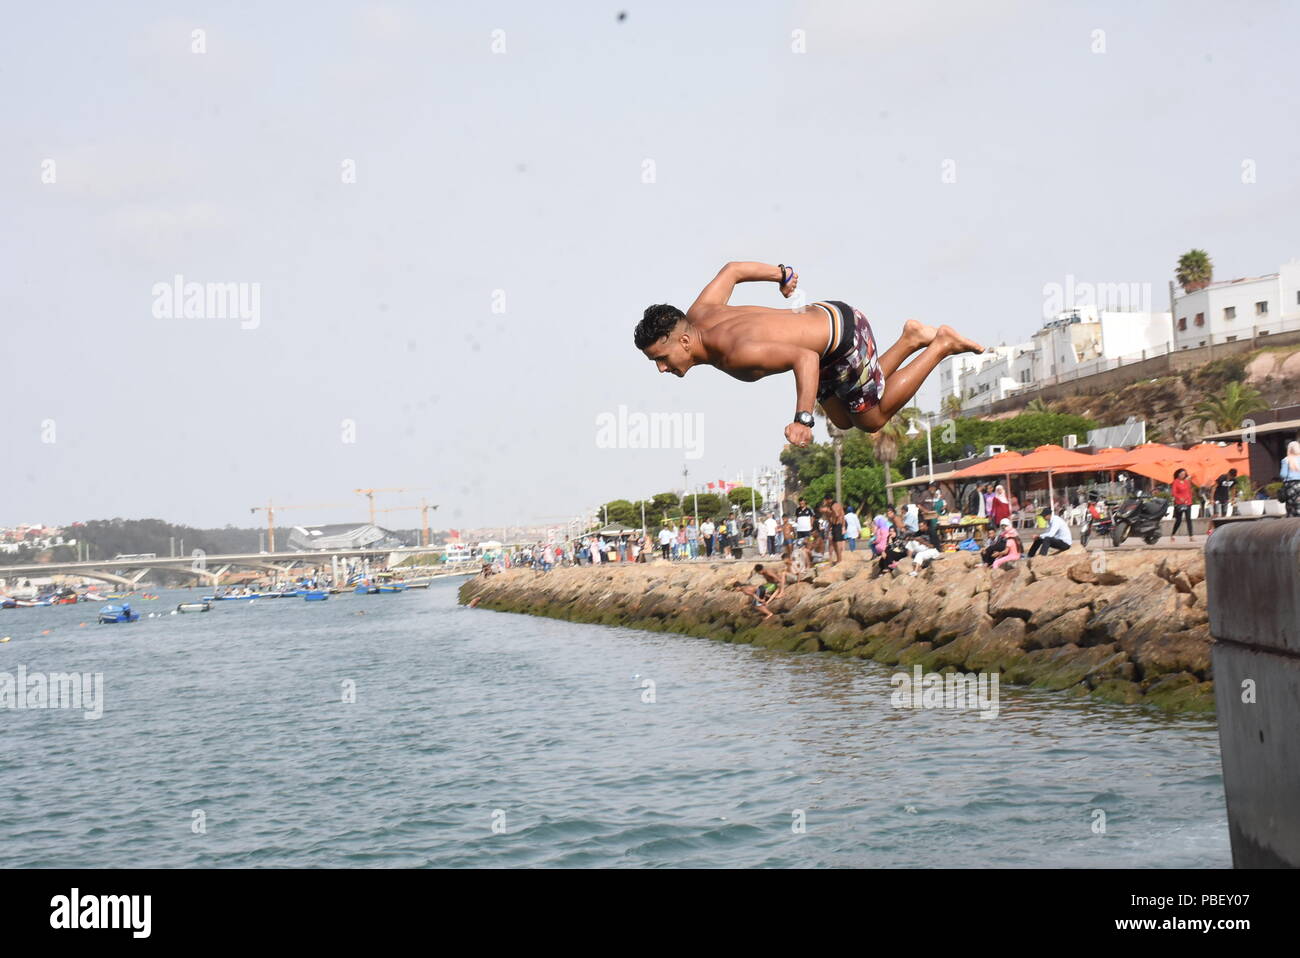 Rabat, Morocco. 28th July, 2018. A boy jumps into water in Rabat, Morocco, on July 28, 2018. Credit: Aissa/Xinhua/Alamy Live News Stock Photo